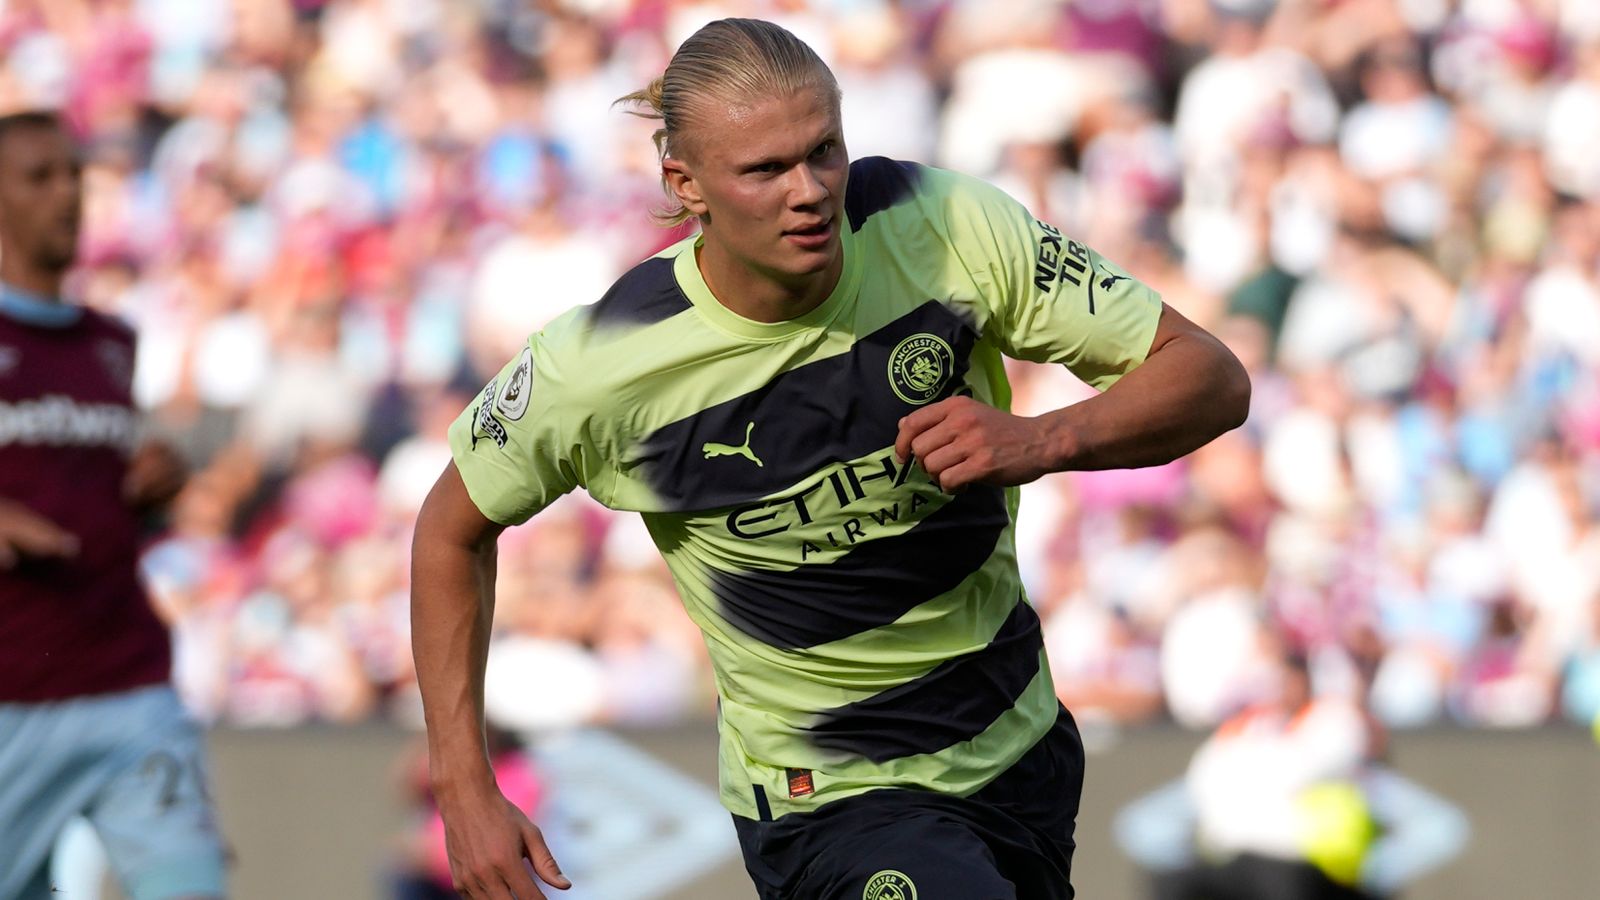 Erling Haaland: Man City's new striker 'unplayable' as he announces himself in style against West Ham